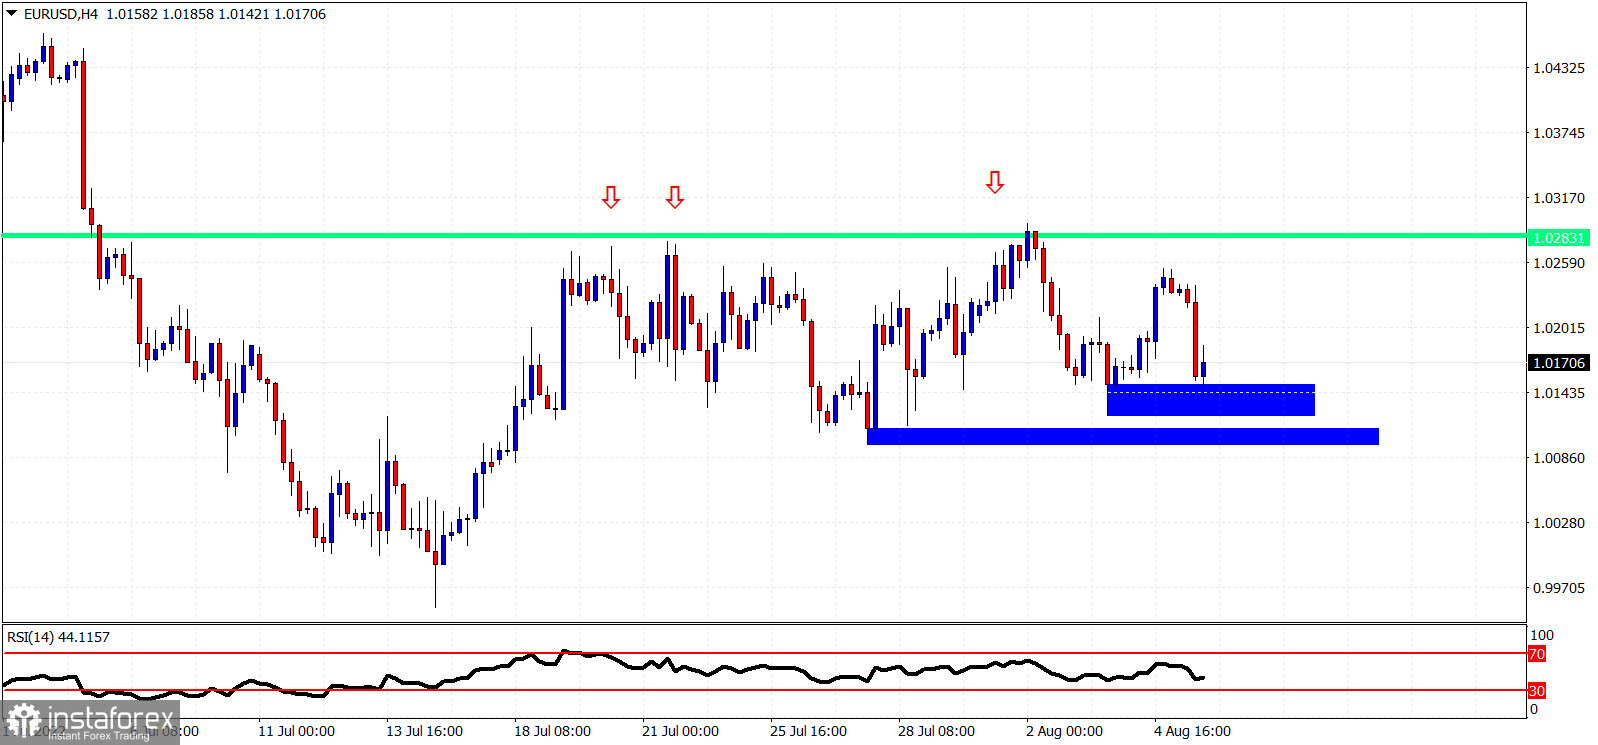 Technical analysis on EURUSD for August 5th, 2022.